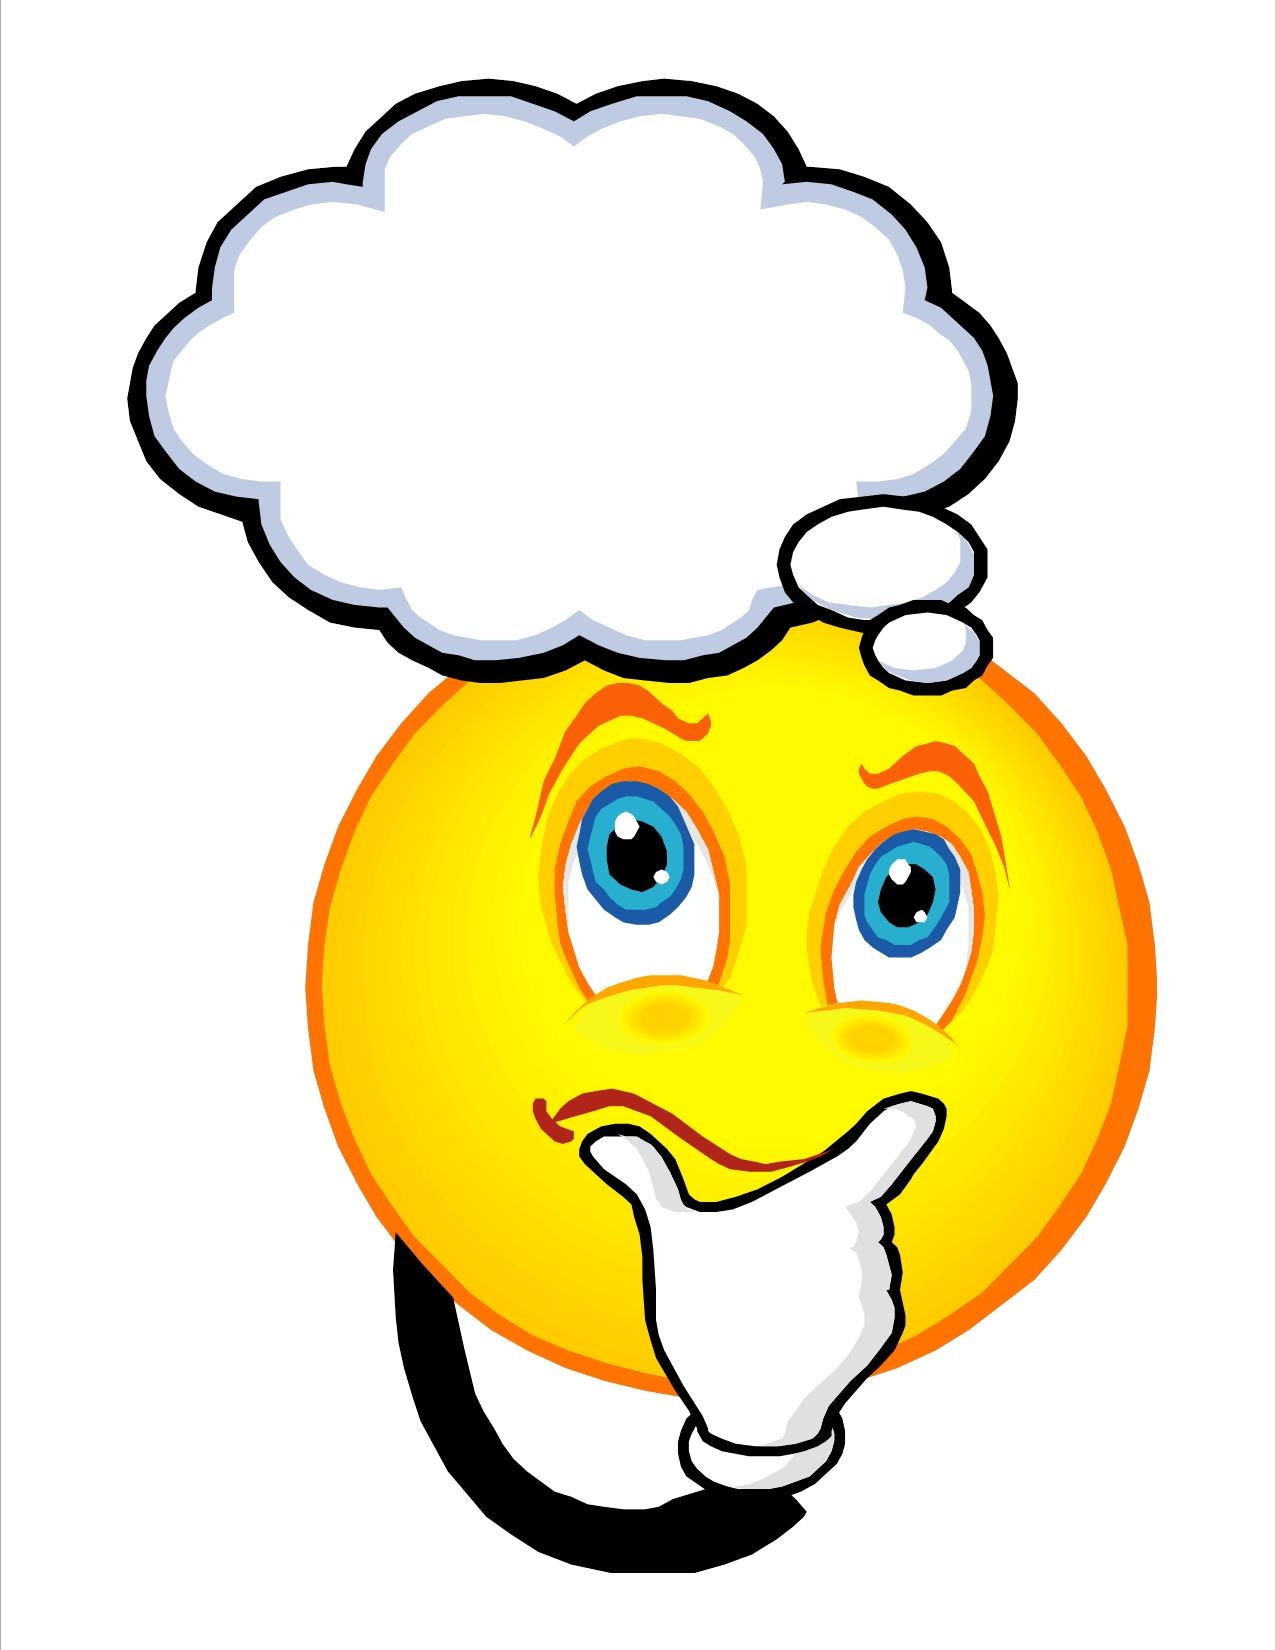 Thinking smiley face clip art